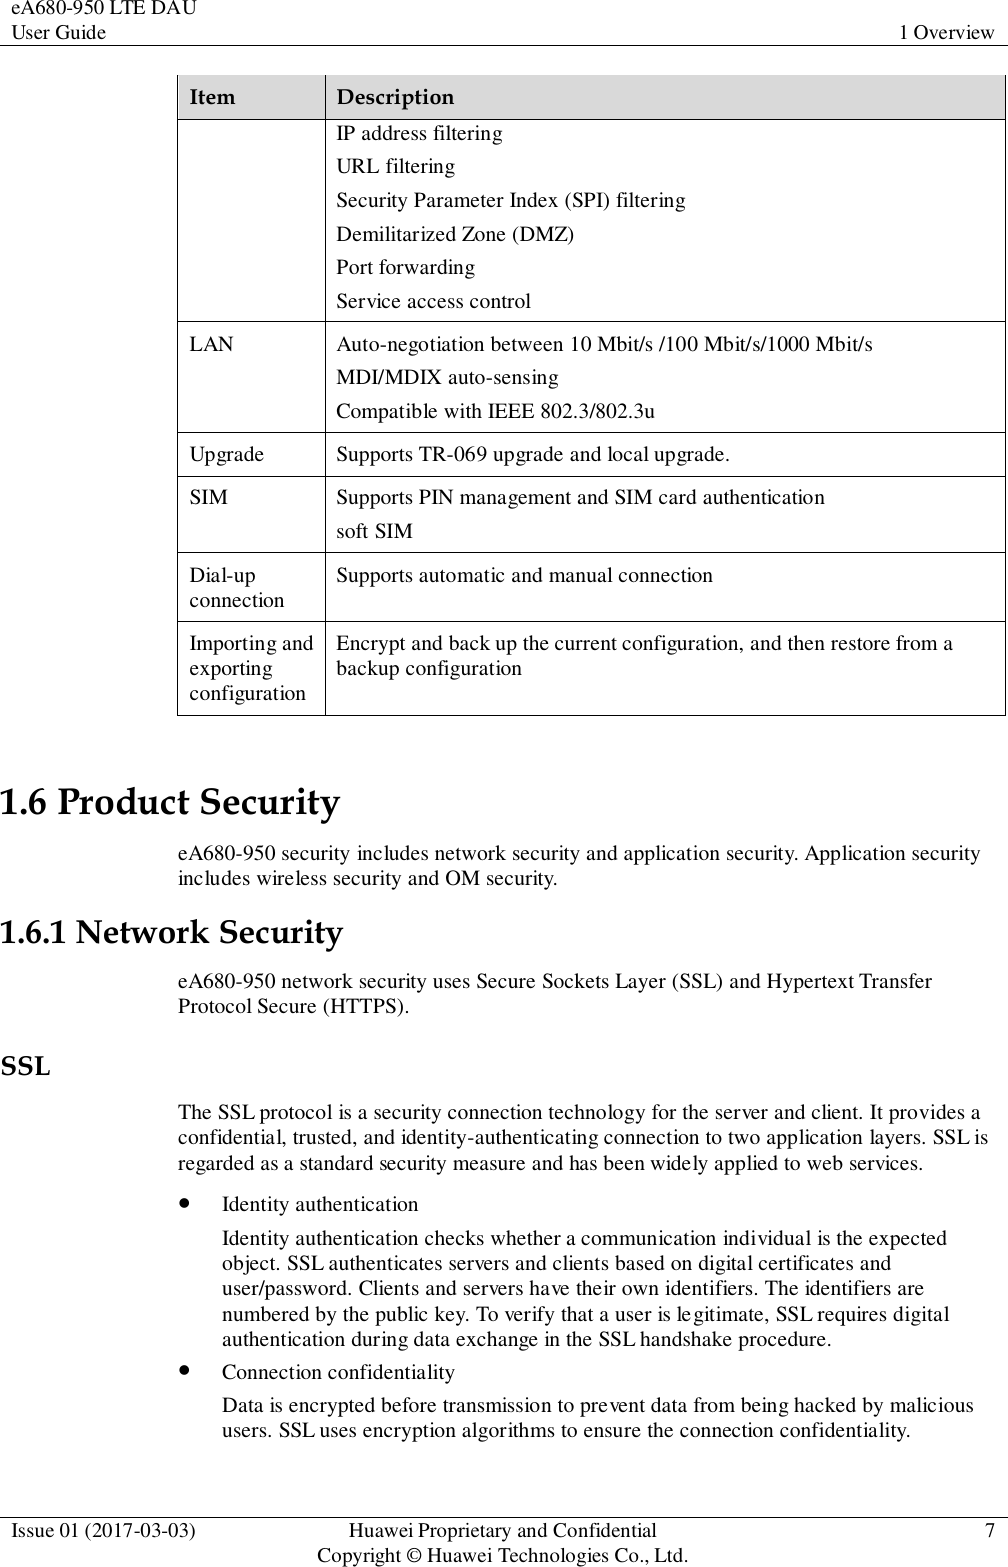 eA680-950 LTE DAU User Guide 1 Overview  Issue 01 (2017-03-03) Huawei Proprietary and Confidential                                     Copyright © Huawei Technologies Co., Ltd. 7  Item Description IP address filtering URL filtering Security Parameter Index (SPI) filtering Demilitarized Zone (DMZ) Port forwarding Service access control LAN Auto-negotiation between 10 Mbit/s /100 Mbit/s/1000 Mbit/s MDI/MDIX auto-sensing Compatible with IEEE 802.3/802.3u Upgrade Supports TR-069 upgrade and local upgrade. SIM Supports PIN management and SIM card authentication soft SIM Dial-up connection Supports automatic and manual connection Importing and exporting configuration Encrypt and back up the current configuration, and then restore from a backup configuration 1.6 Product Security eA680-950 security includes network security and application security. Application security includes wireless security and OM security. 1.6.1 Network Security eA680-950 network security uses Secure Sockets Layer (SSL) and Hypertext Transfer Protocol Secure (HTTPS). SSL The SSL protocol is a security connection technology for the server and client. It provides a confidential, trusted, and identity-authenticating connection to two application layers. SSL is regarded as a standard security measure and has been widely applied to web services.  Identity authentication Identity authentication checks whether a communication individual is the expected object. SSL authenticates servers and clients based on digital certificates and user/password. Clients and servers have their own identifiers. The identifiers are numbered by the public key. To verify that a user is legitimate, SSL requires digital authentication during data exchange in the SSL handshake procedure.  Connection confidentiality Data is encrypted before transmission to prevent data from being hacked by malicious users. SSL uses encryption algorithms to ensure the connection confidentiality. 